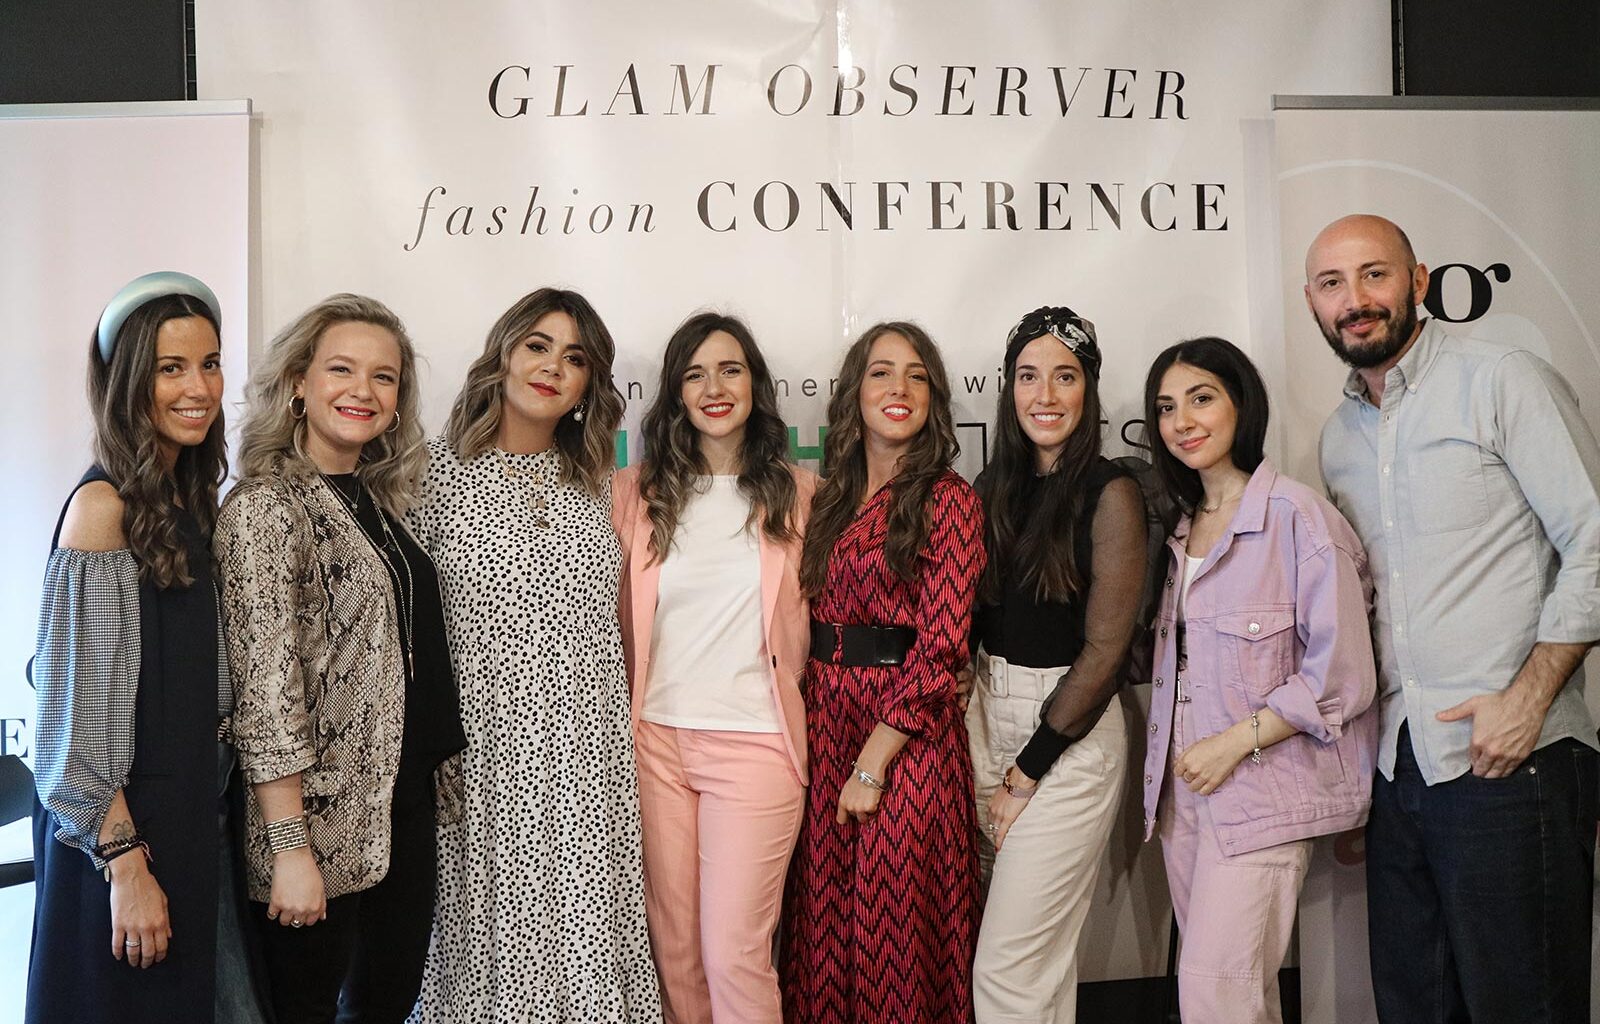 Glam Observer Fashion Conference Milan 2019